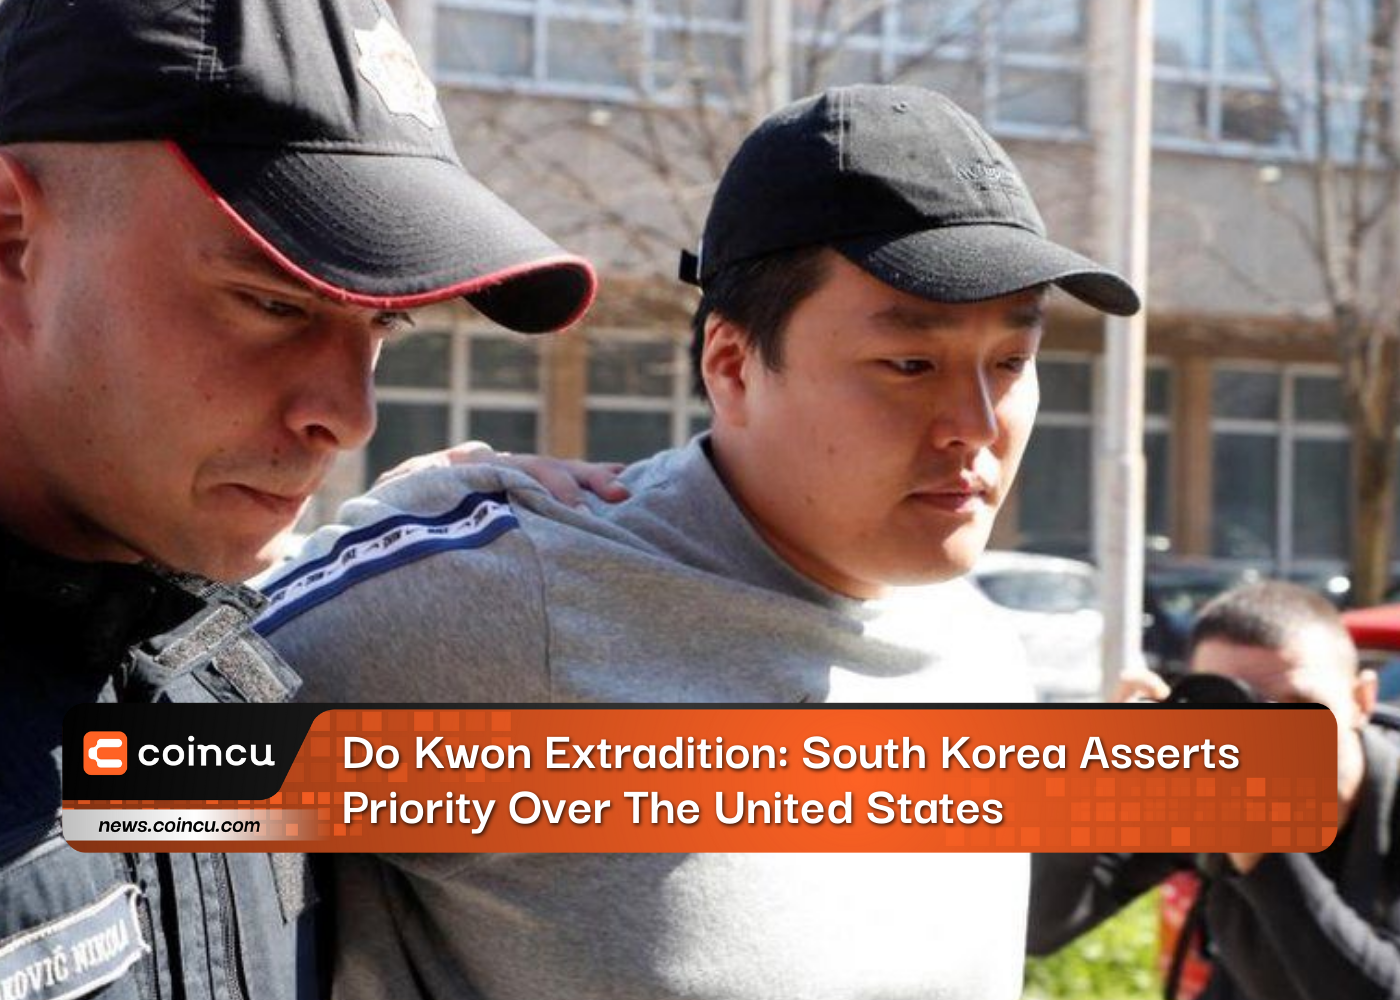 Do Kwon Extradition: South Korea Asserts Priority Over The United States